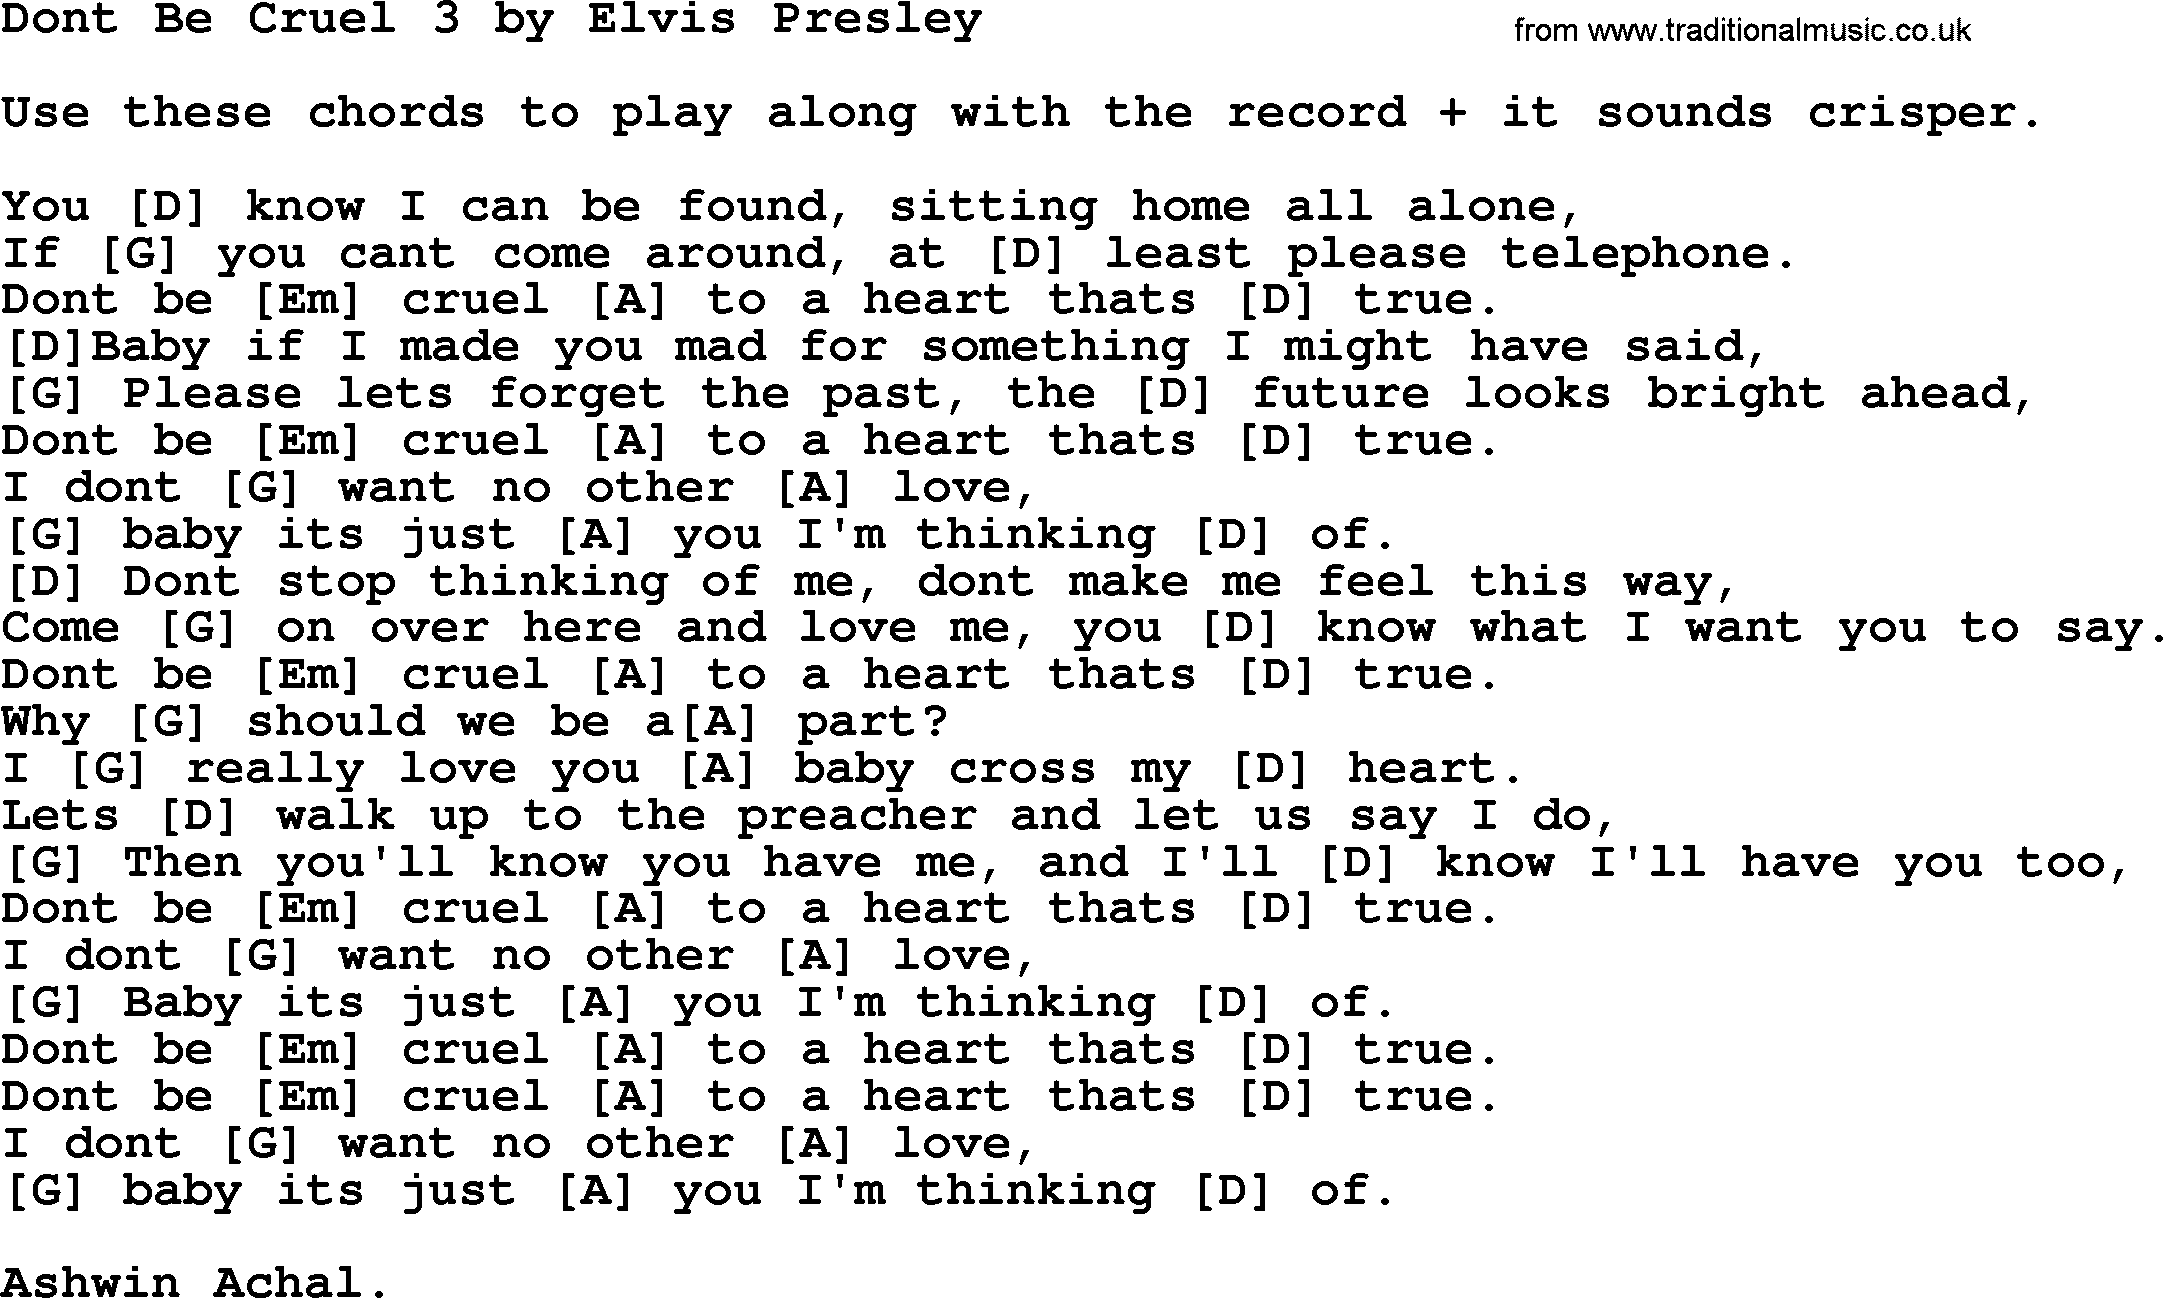 Elvis Presley song: Dont Be Cruel 3, lyrics and chords